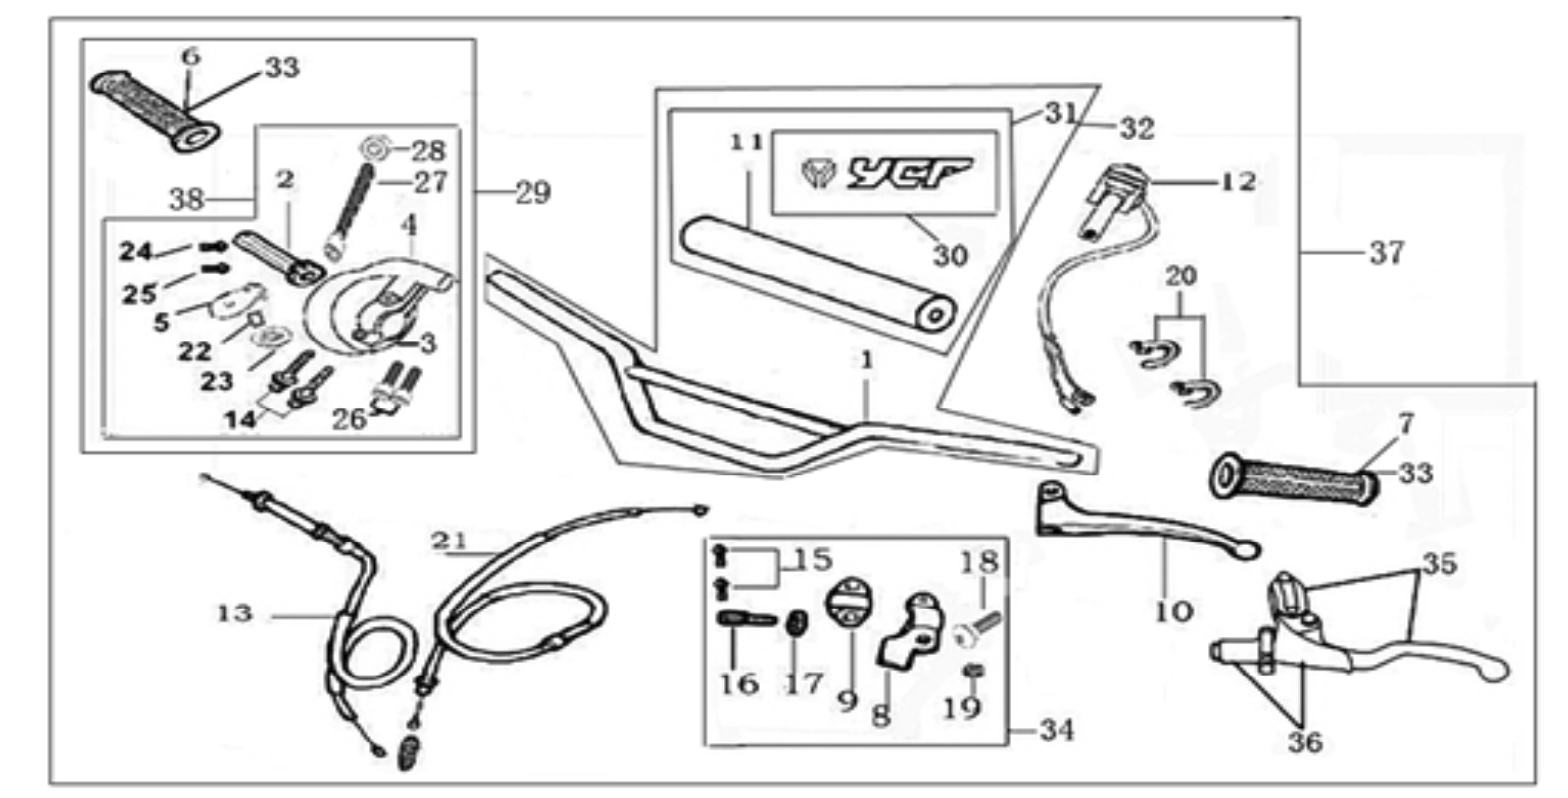 01 Handle bar assembly